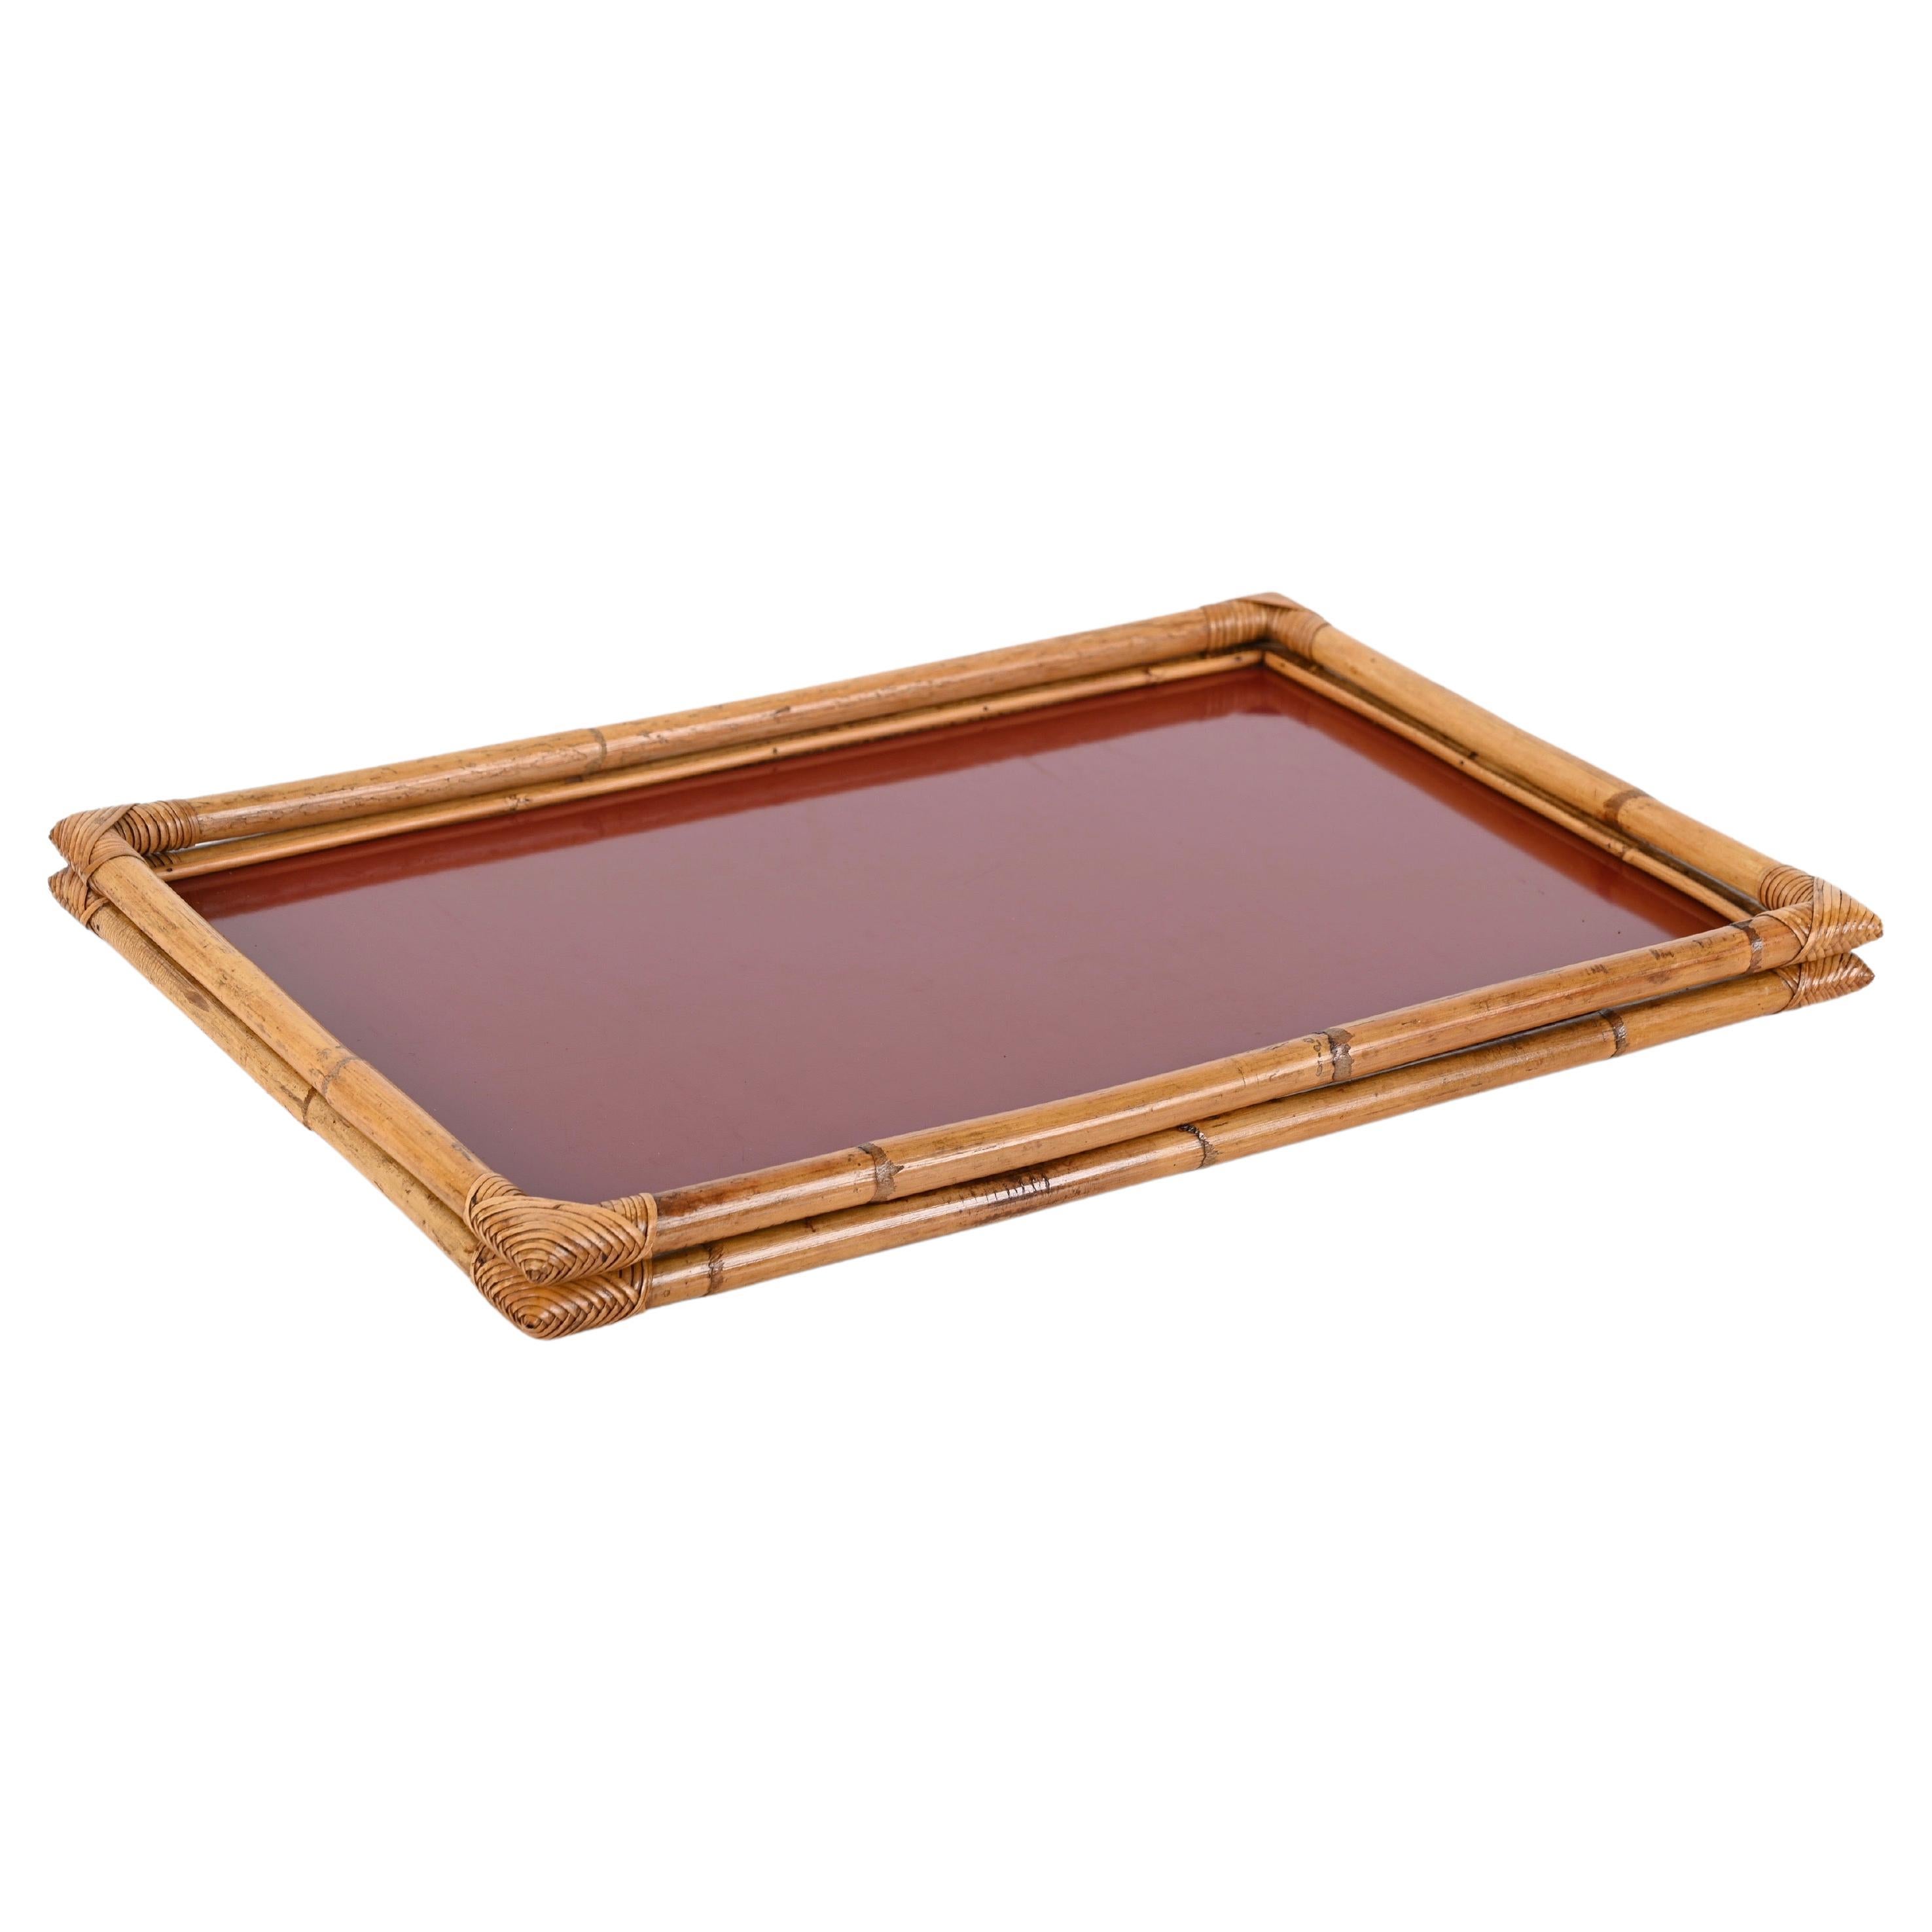 Bamboo, Rattan and Red Bakelite Serving Tray by Cesare de Cesare, Italy 1970s